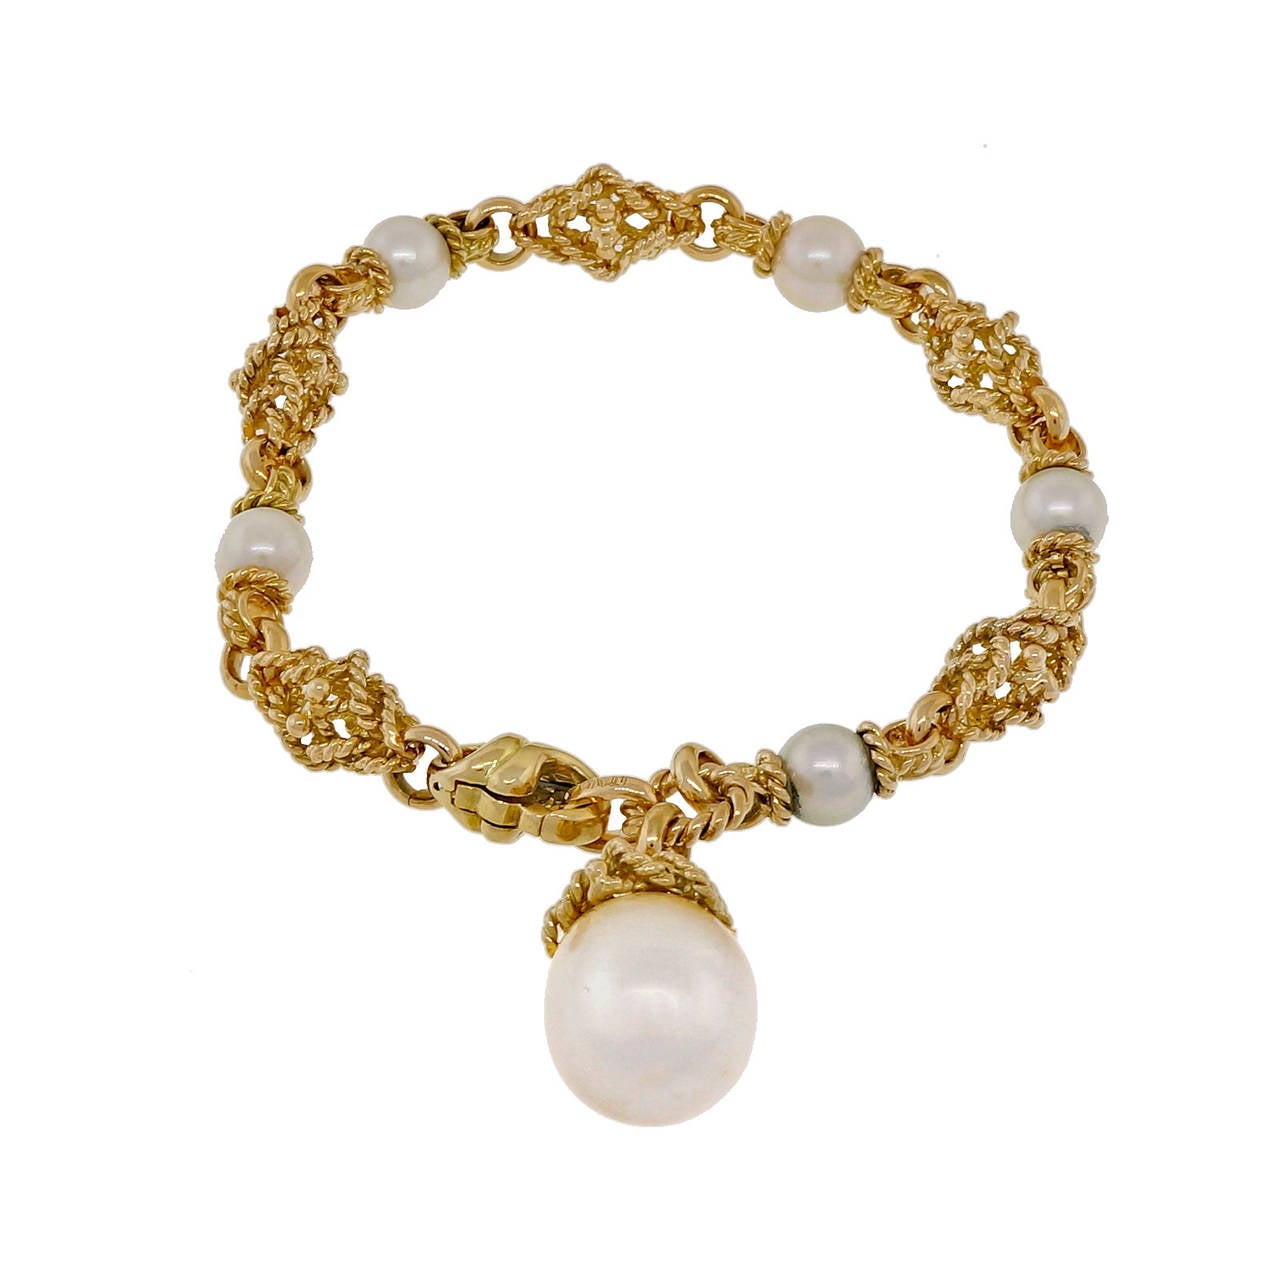 Solid 18k yellow gold 3 dimensional textured link bracelet with a South Sea pearl dangle and pearls throughout. Circa 1960. See our matching necklace.

5 Japanese culture pearls 6.5 – 7mm
1 South Sea pearl 14.75 x 12.75mm
18k yellow gold
27.7